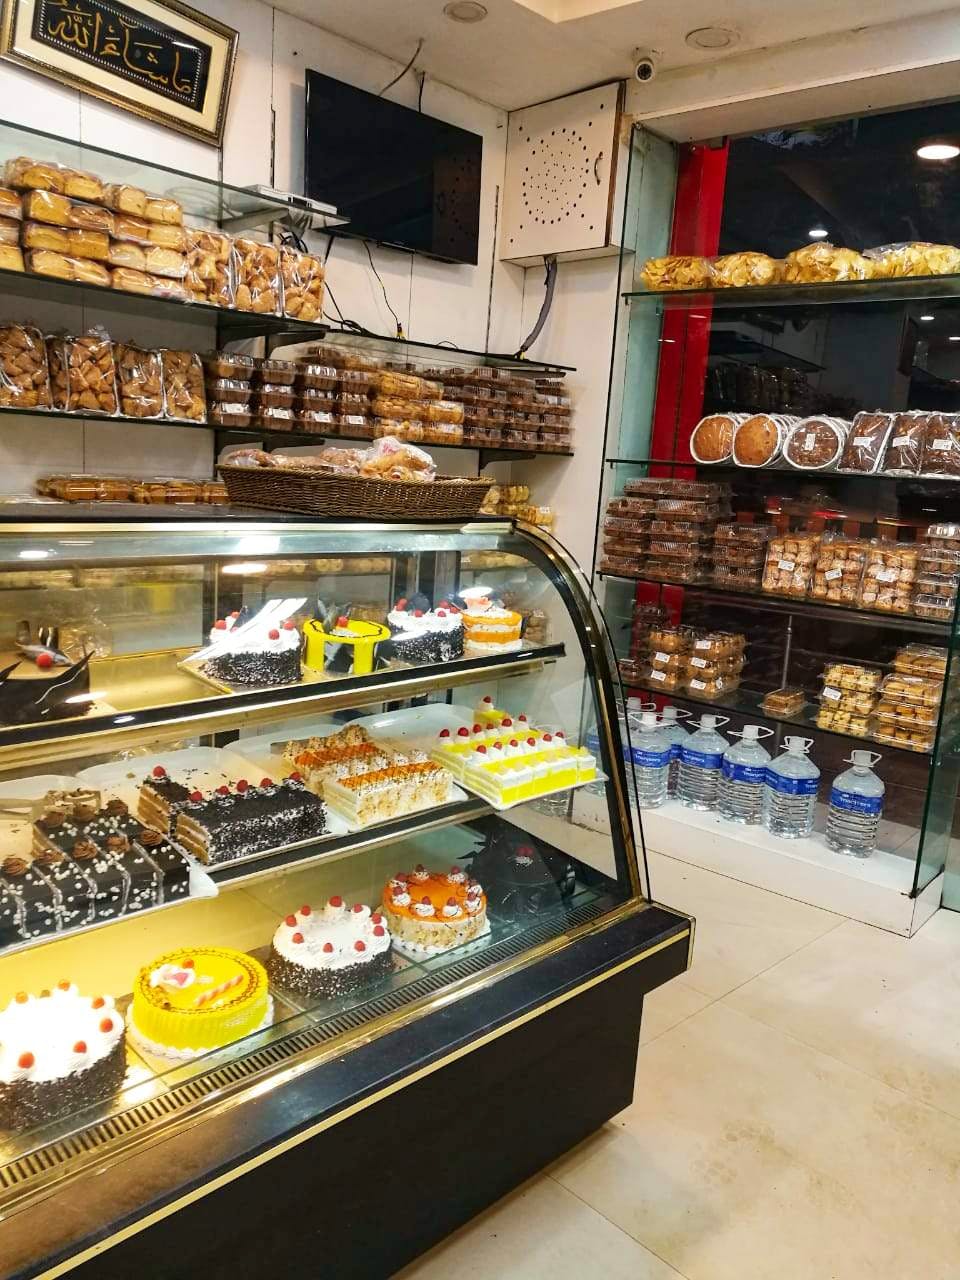 Bakery,Pâtisserie,Display case,Delicatessen,Grocery store,Food,Convenience food,Pastry,Delicacy,Supermarket